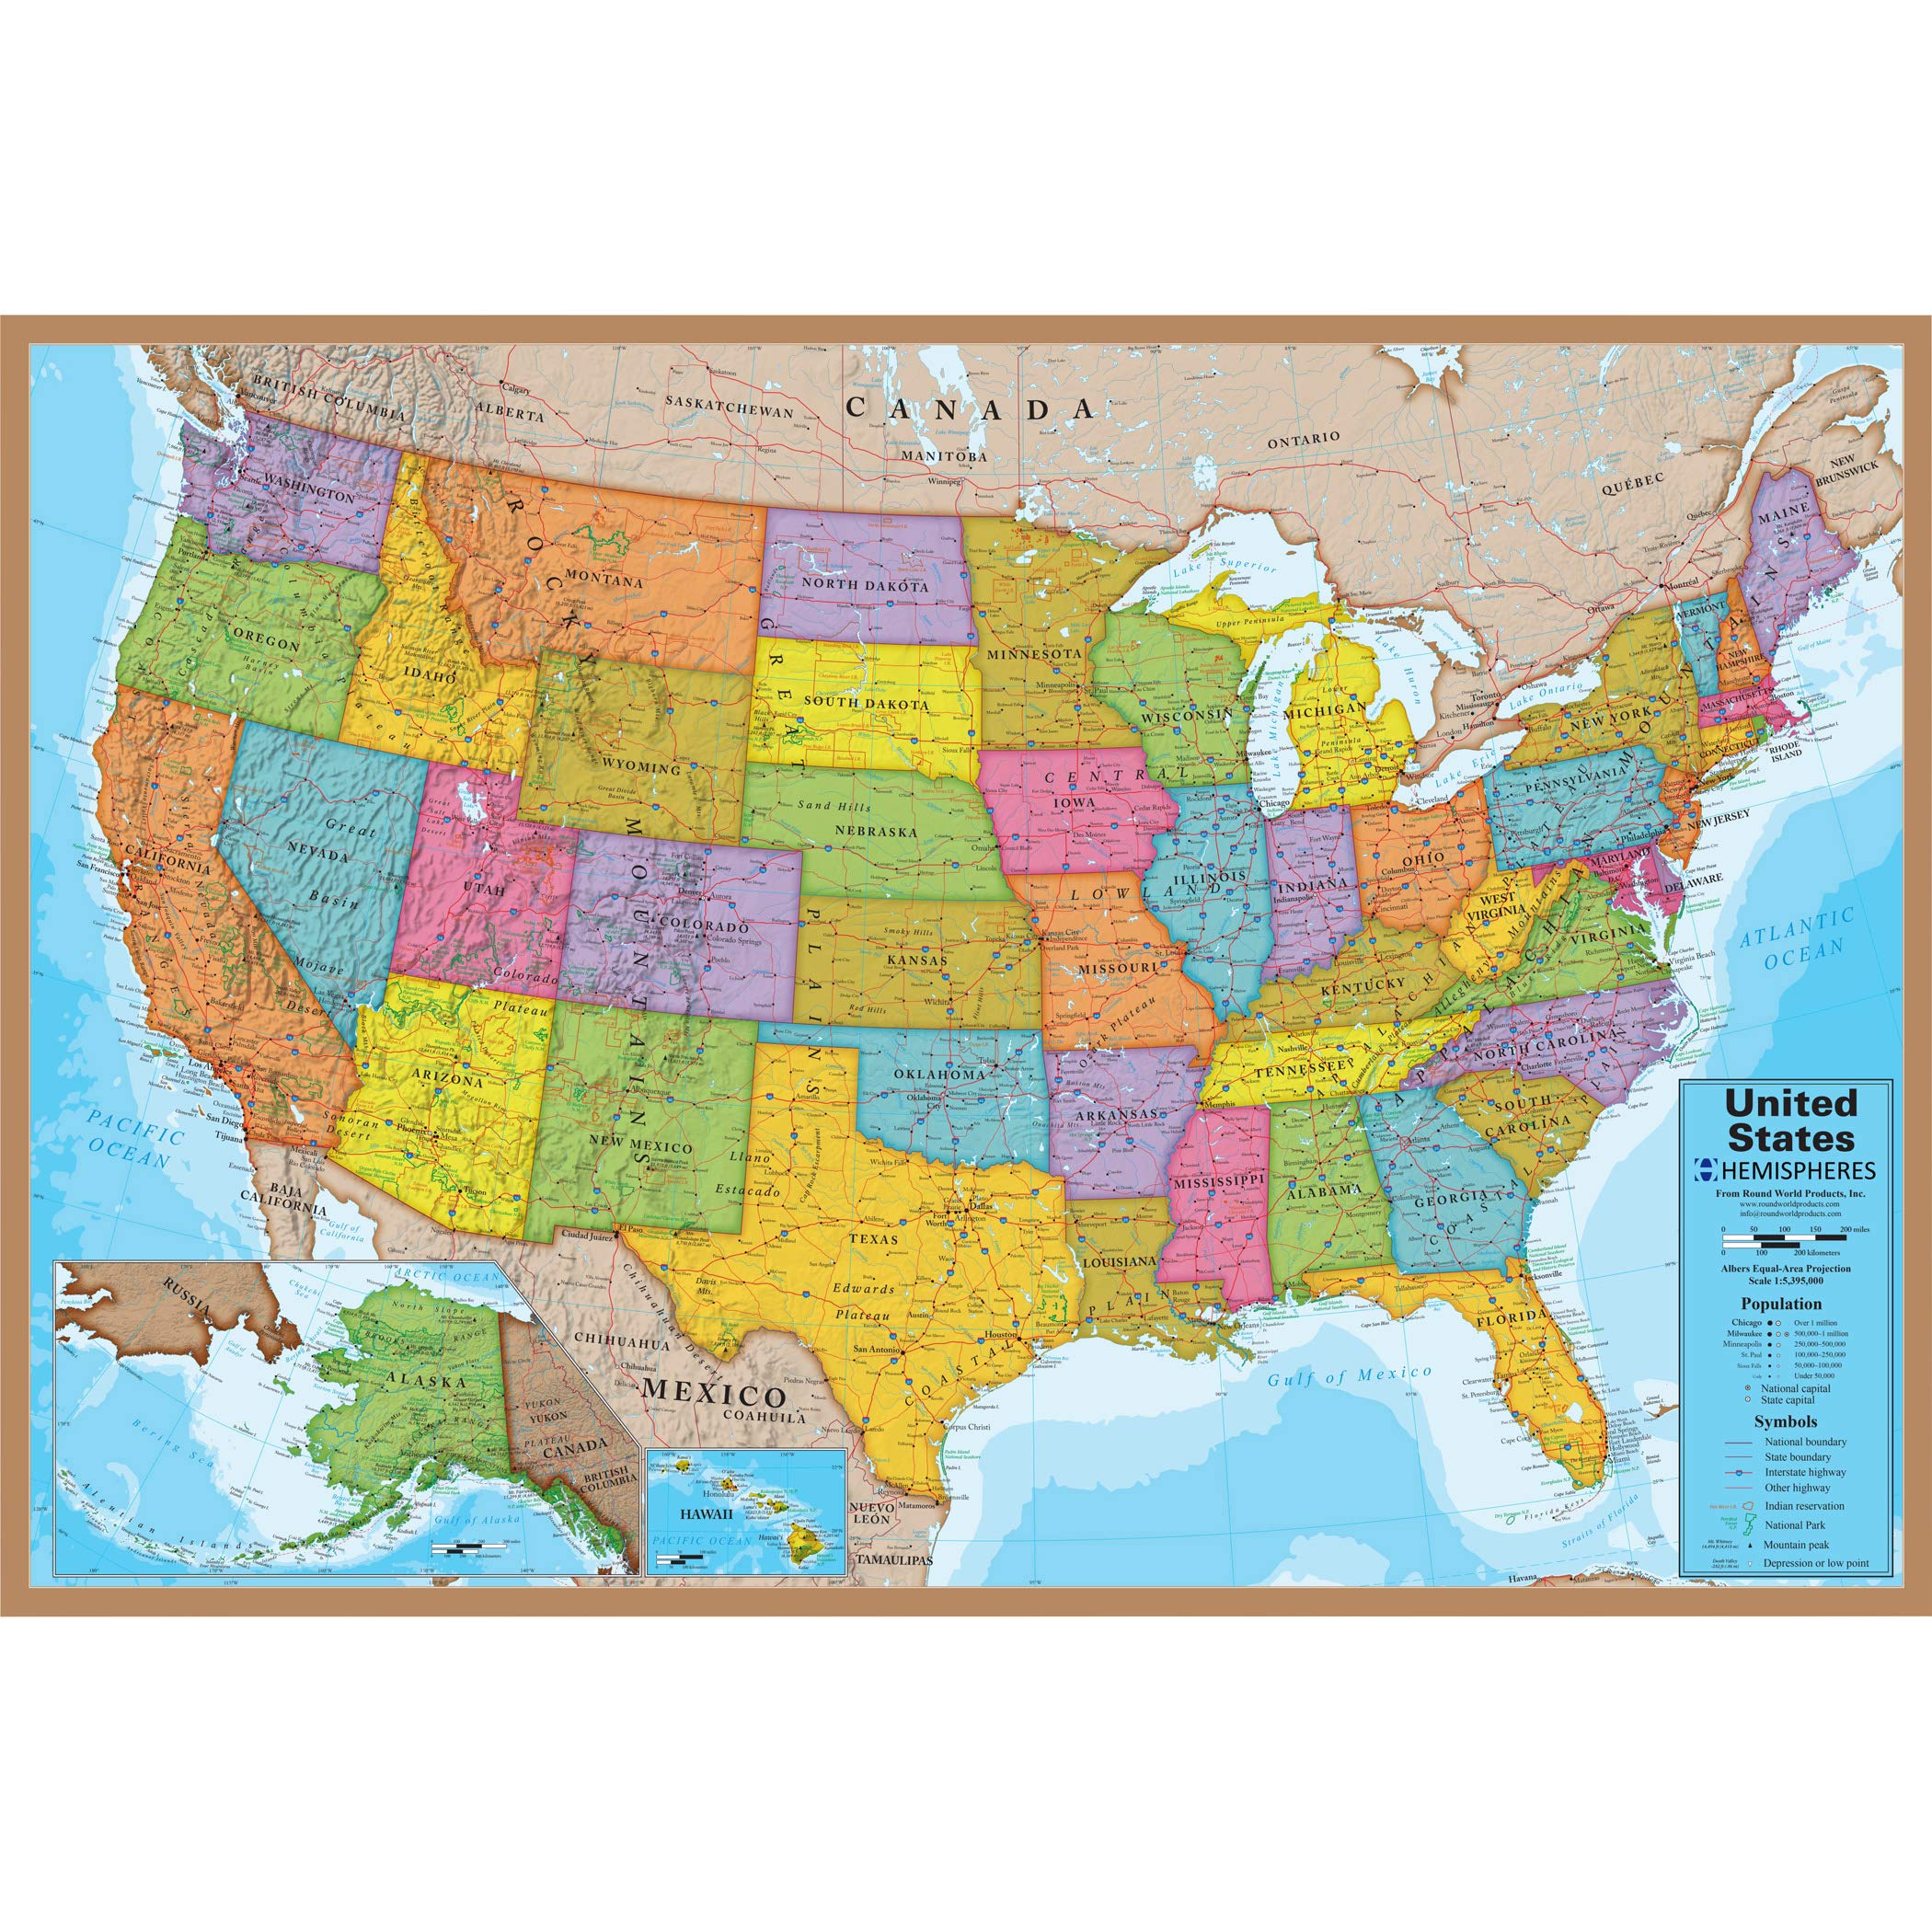 Waypoint Geographic USA Map 500-Piece Jigsaw Puzzle, Puzzles for Kids, Jigsaw Puzzles for Endless Fun, Educational Puzzles for Personalized Gifts, 24″ x 36”